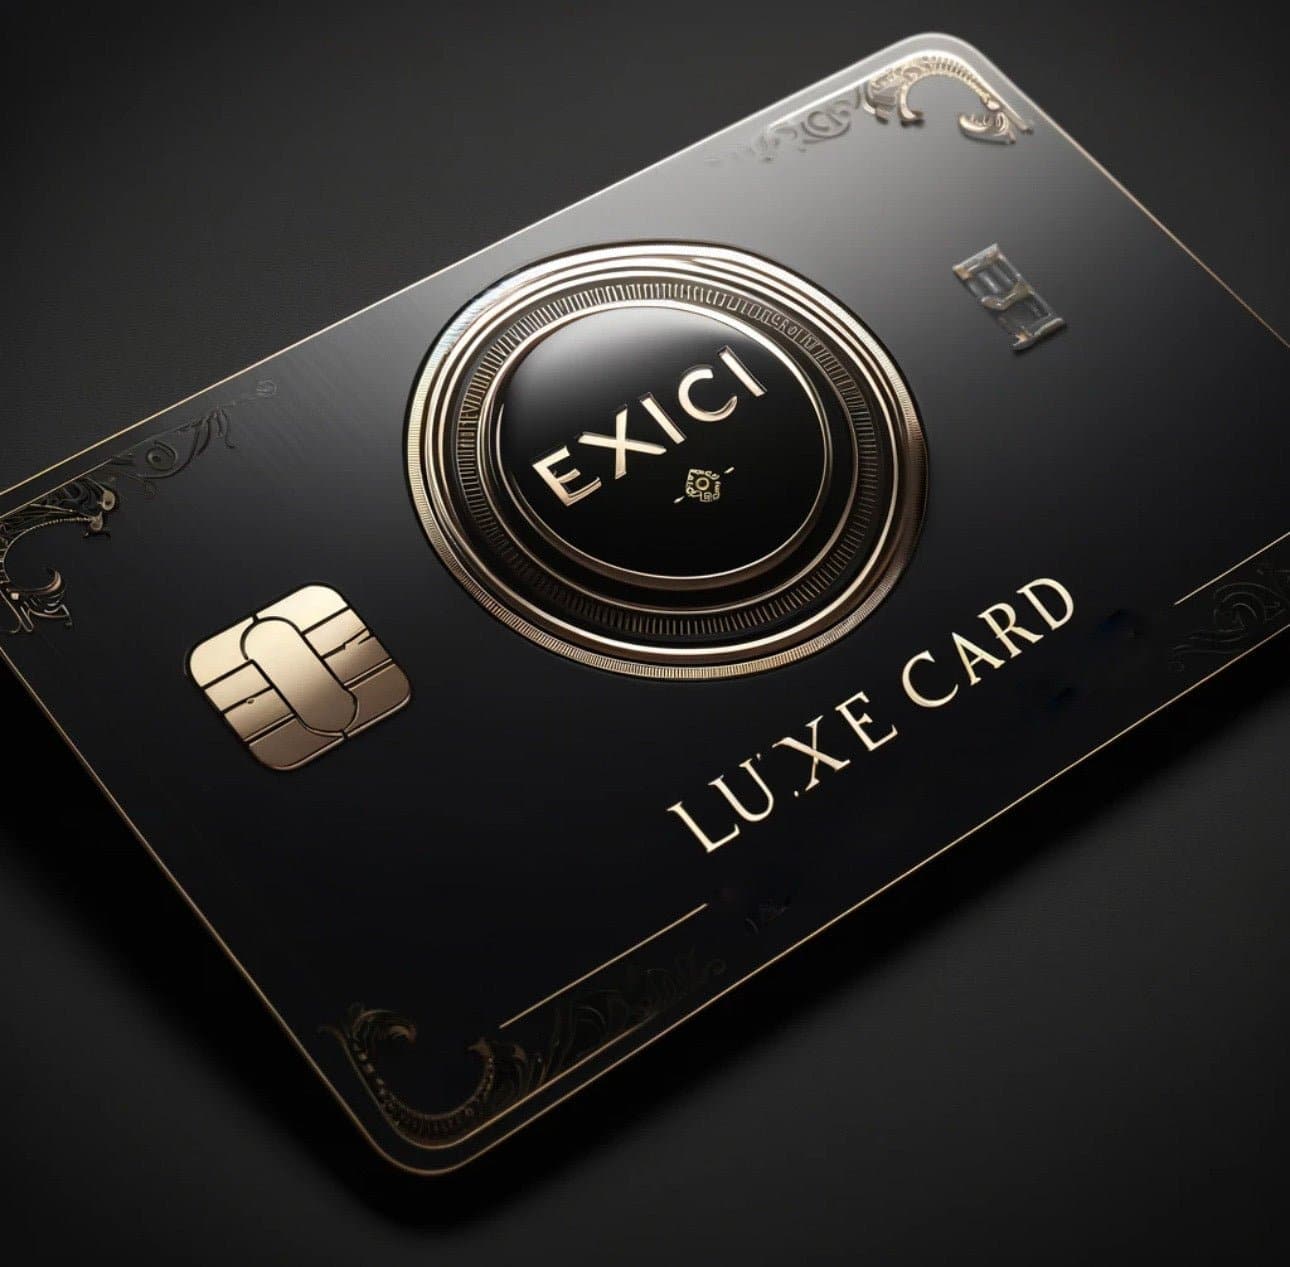 Luxe Card - Exici